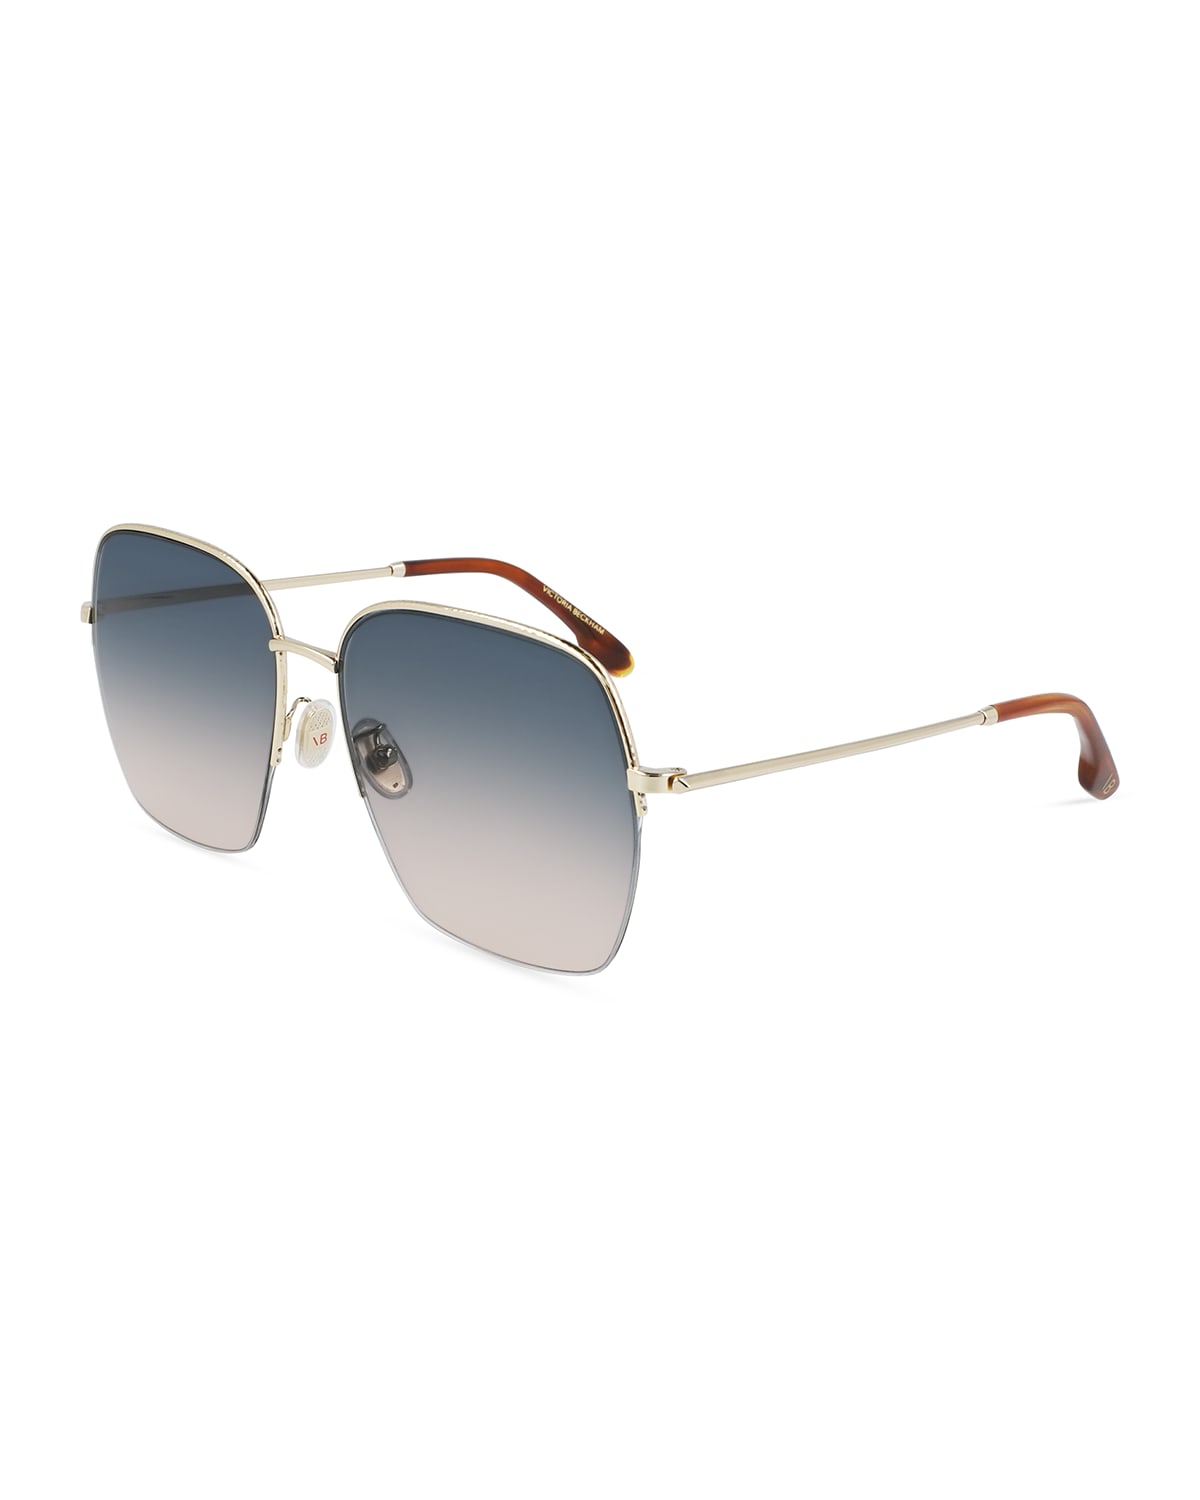 Victoria Beckham Hammered Oversized Square Metal Sunglasses In Gold/petrol/sand